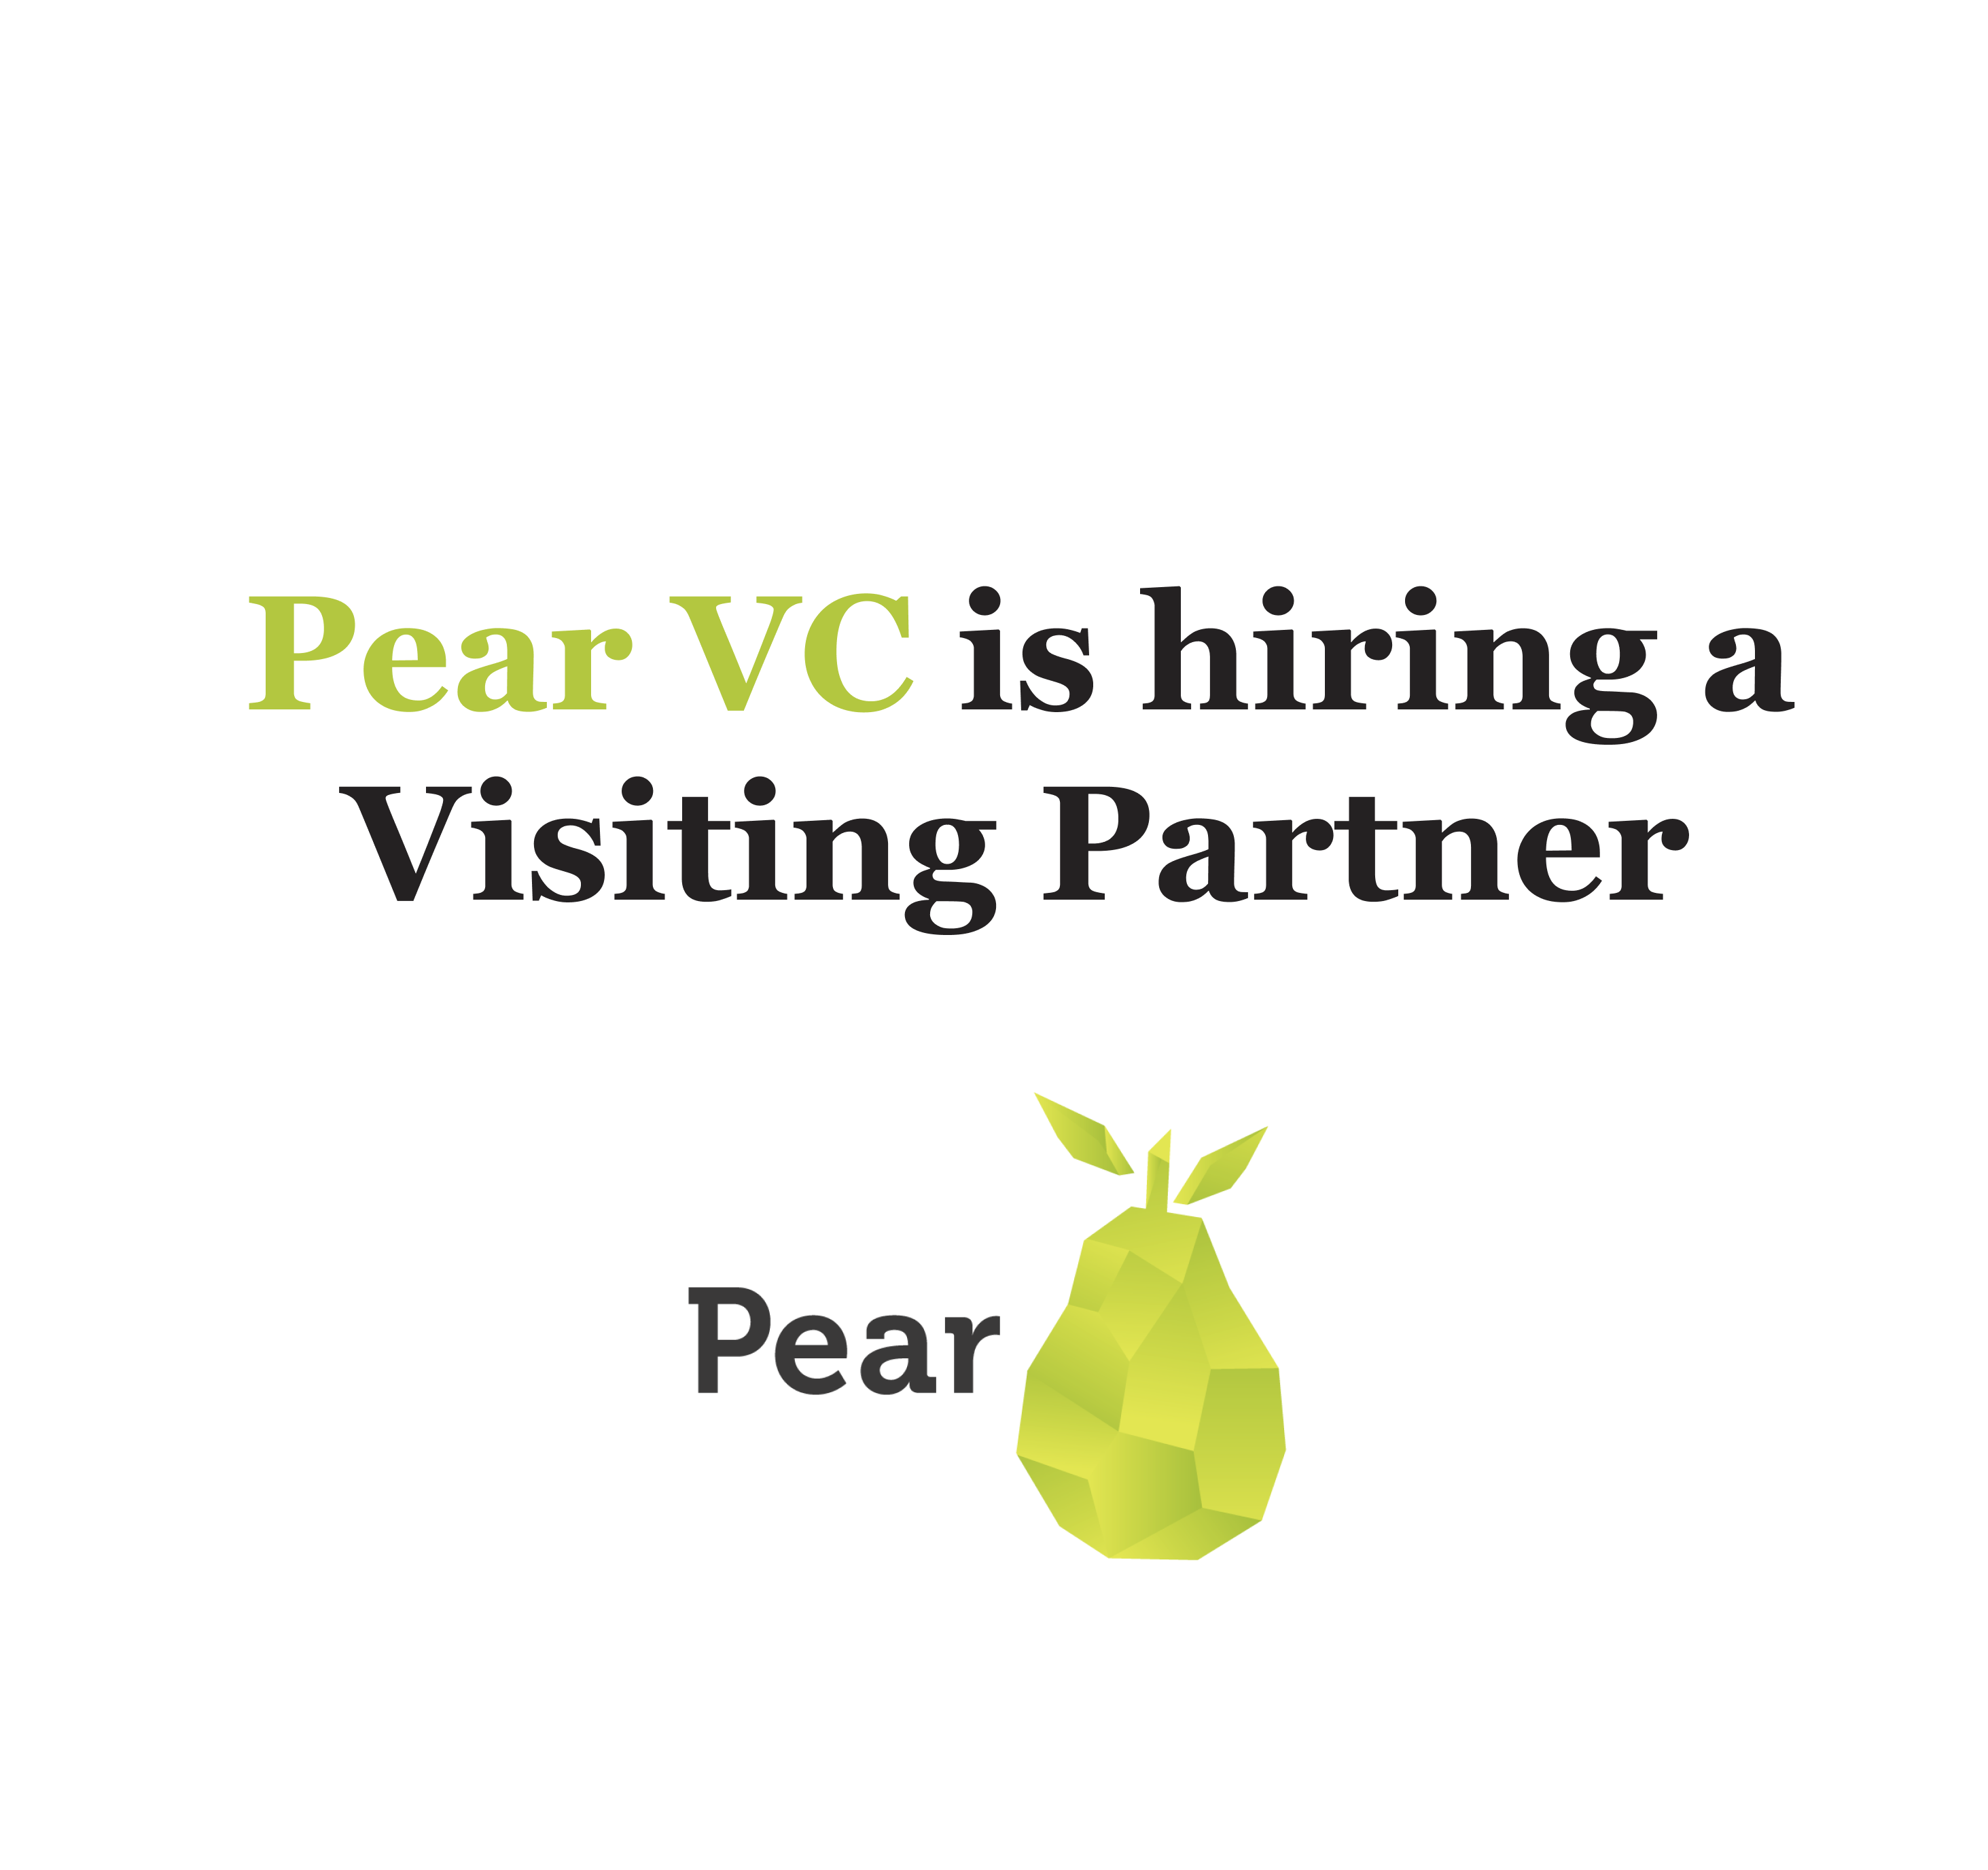 Come join Pear as a Visiting Partner!